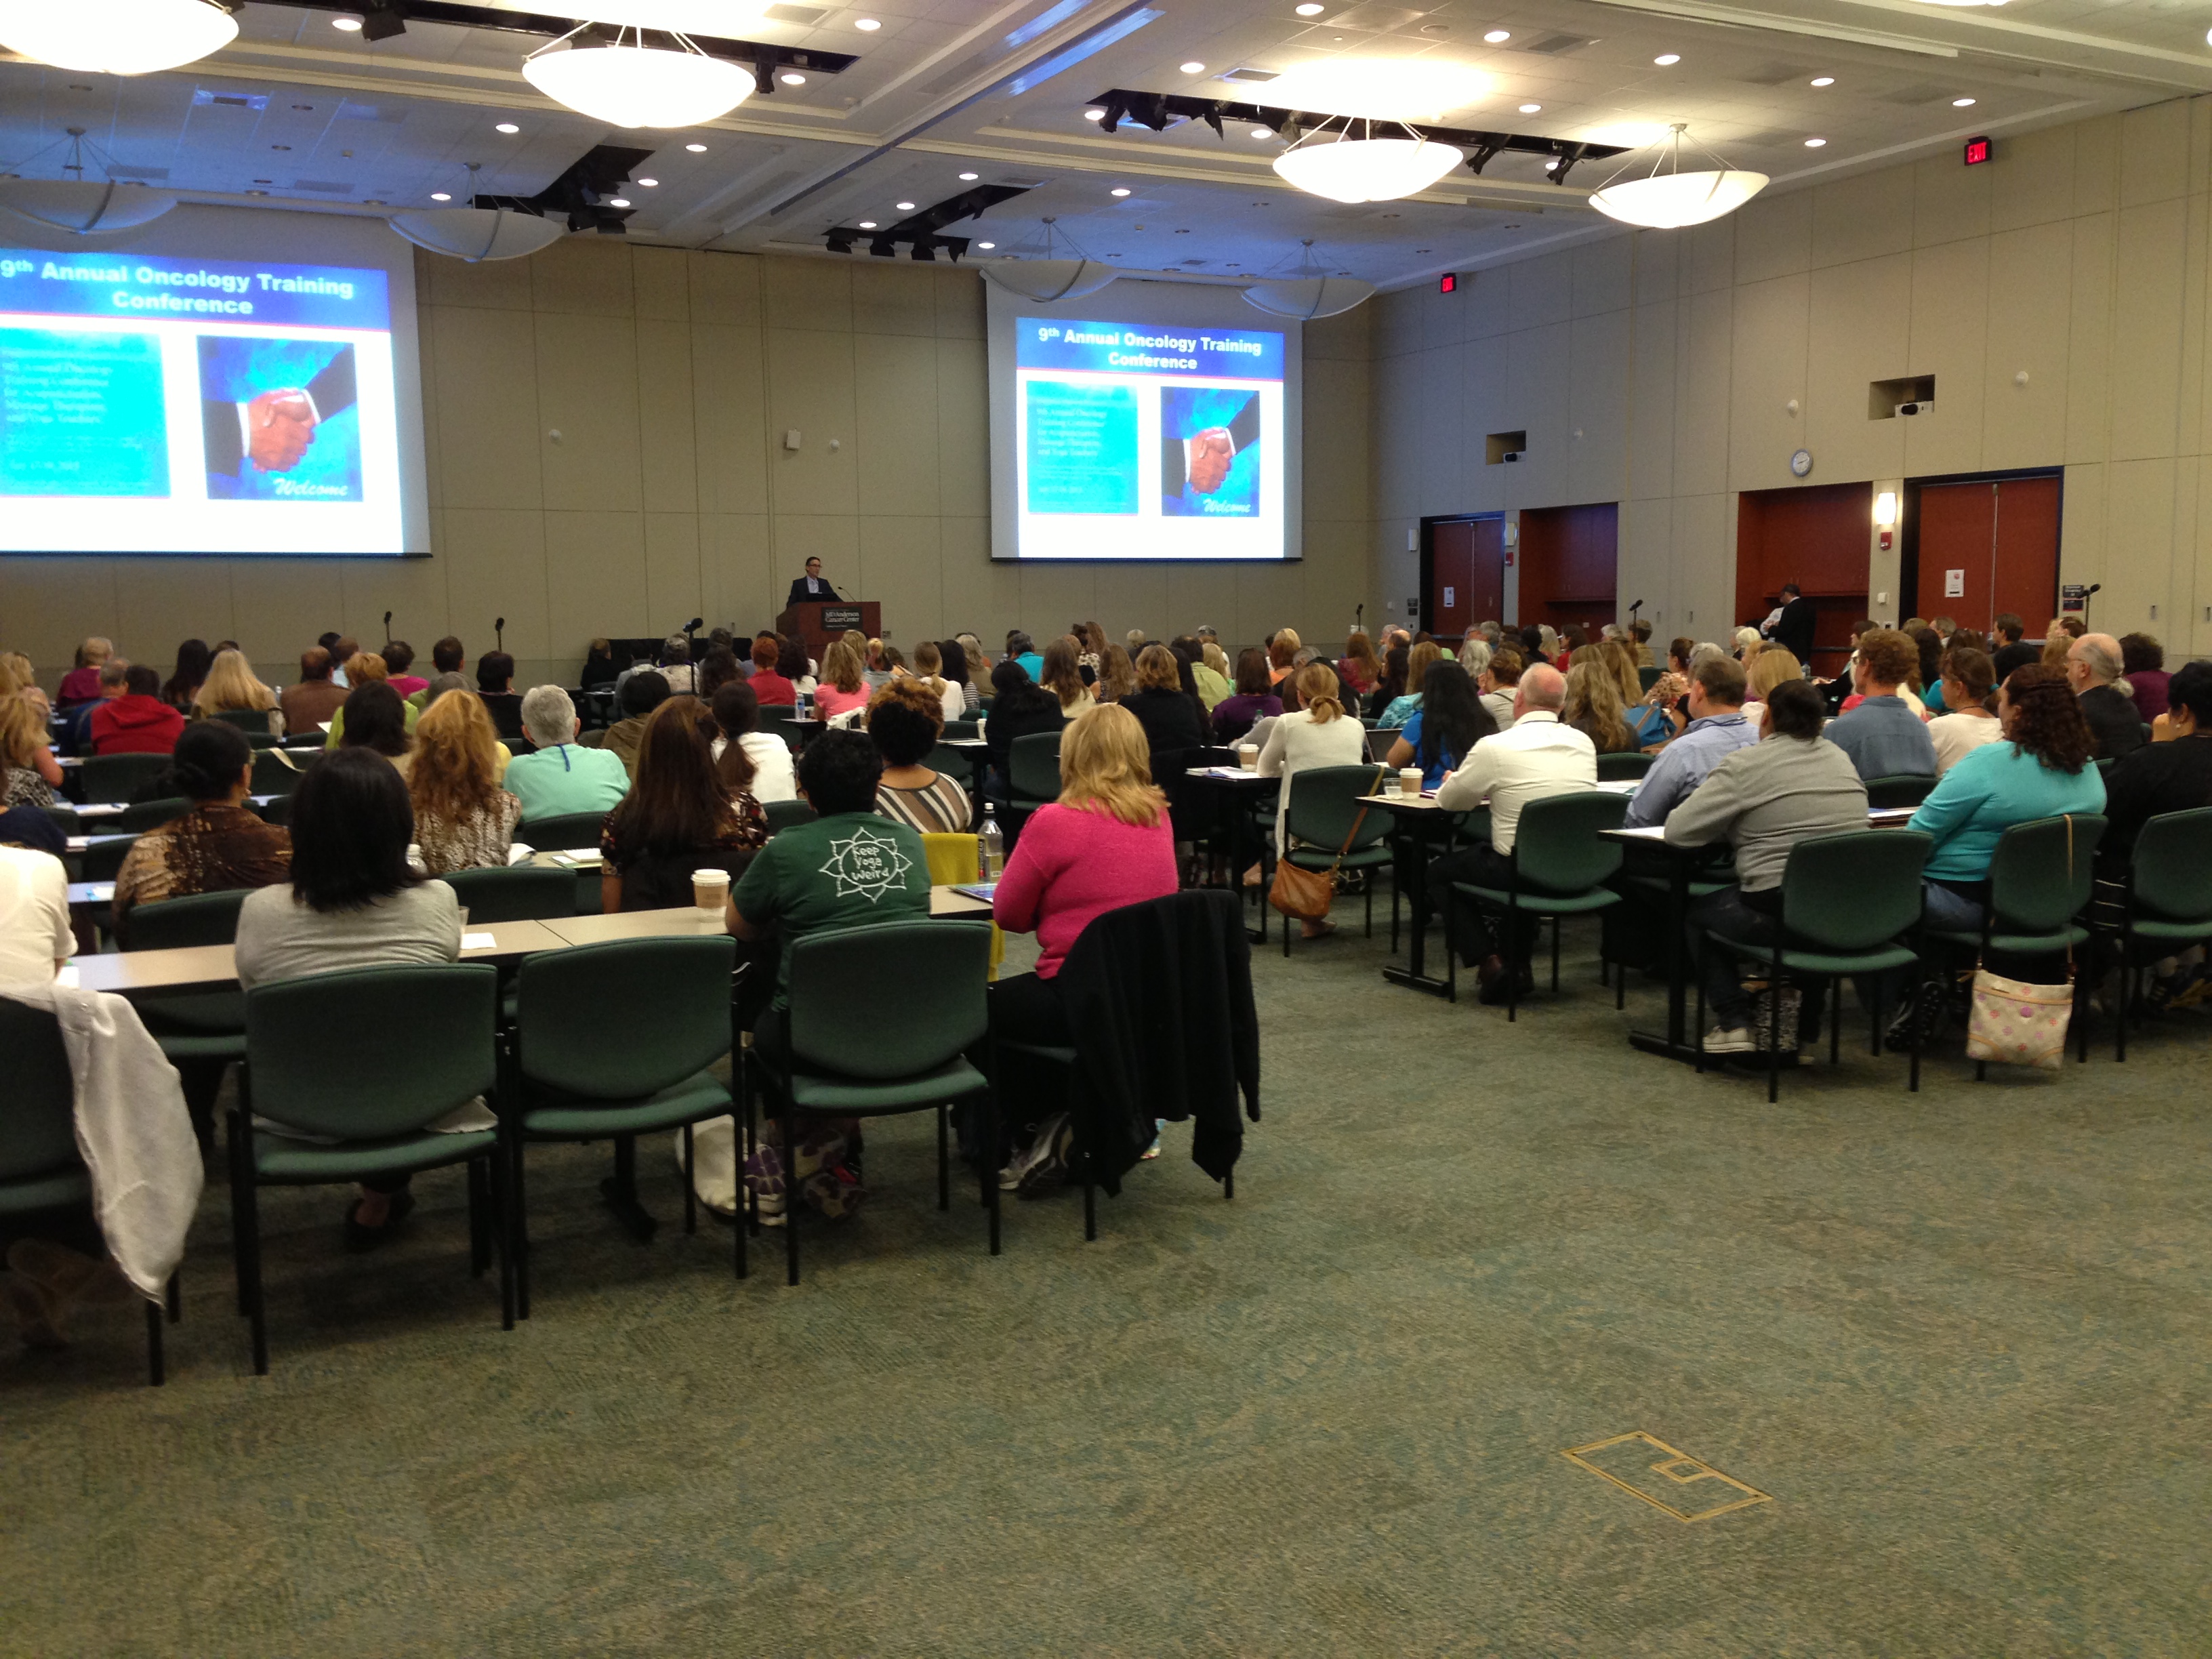 Intergrative Medicine Programs 9th Annual Oncology Training Confererence For Acupuncture. Houston July 18, 2013 